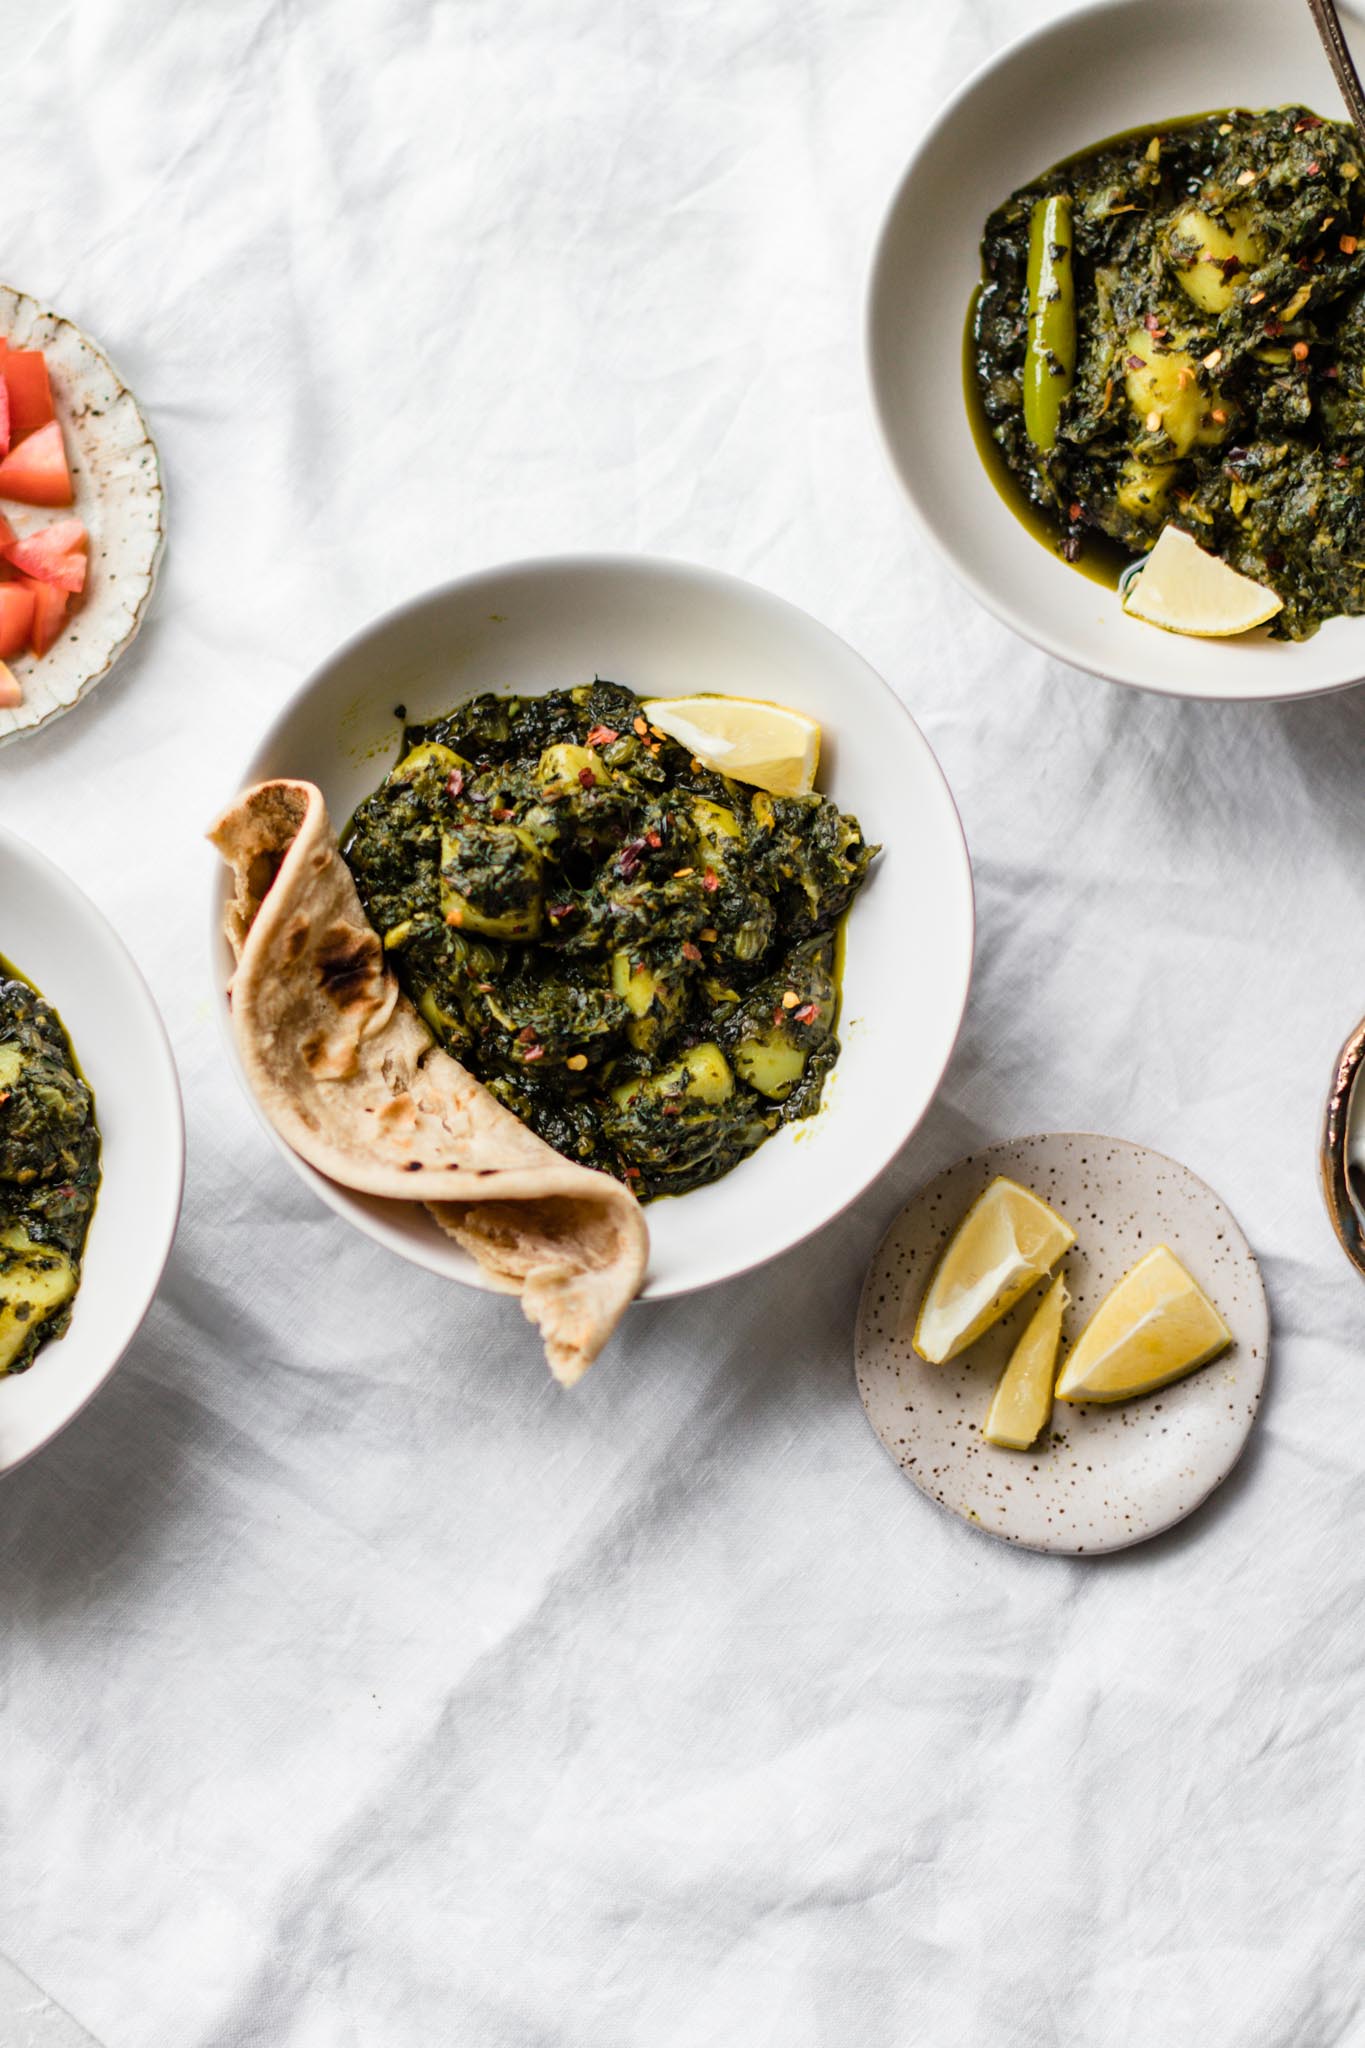 Bowls of Spinach and Potato Curry (Aloo Palak) with lemon on the side